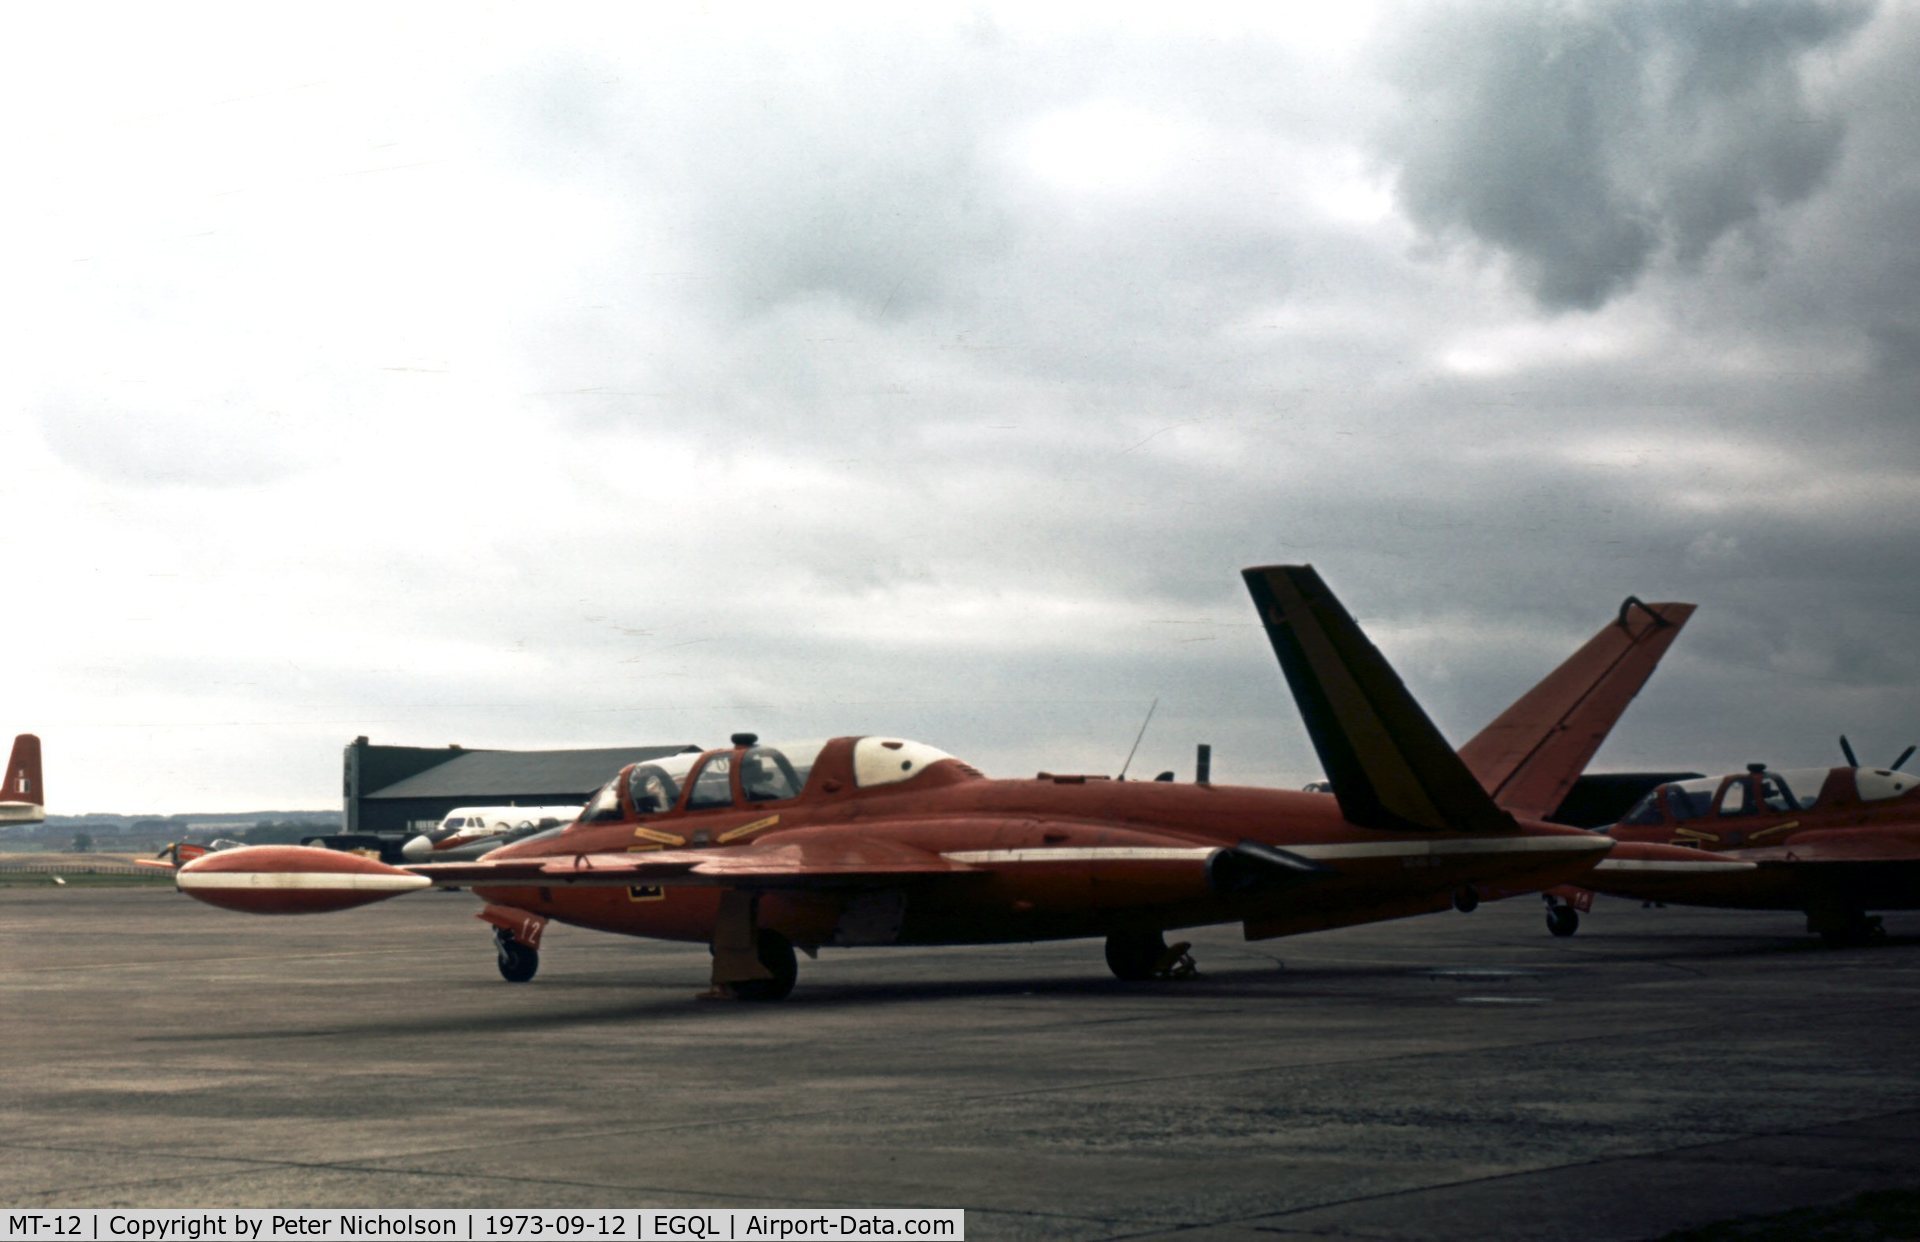 MT-12, Fouga CM-170 Magister C/N 269, Belgian Air Force display team. The aircraft was later withdrawn from use in 1978.